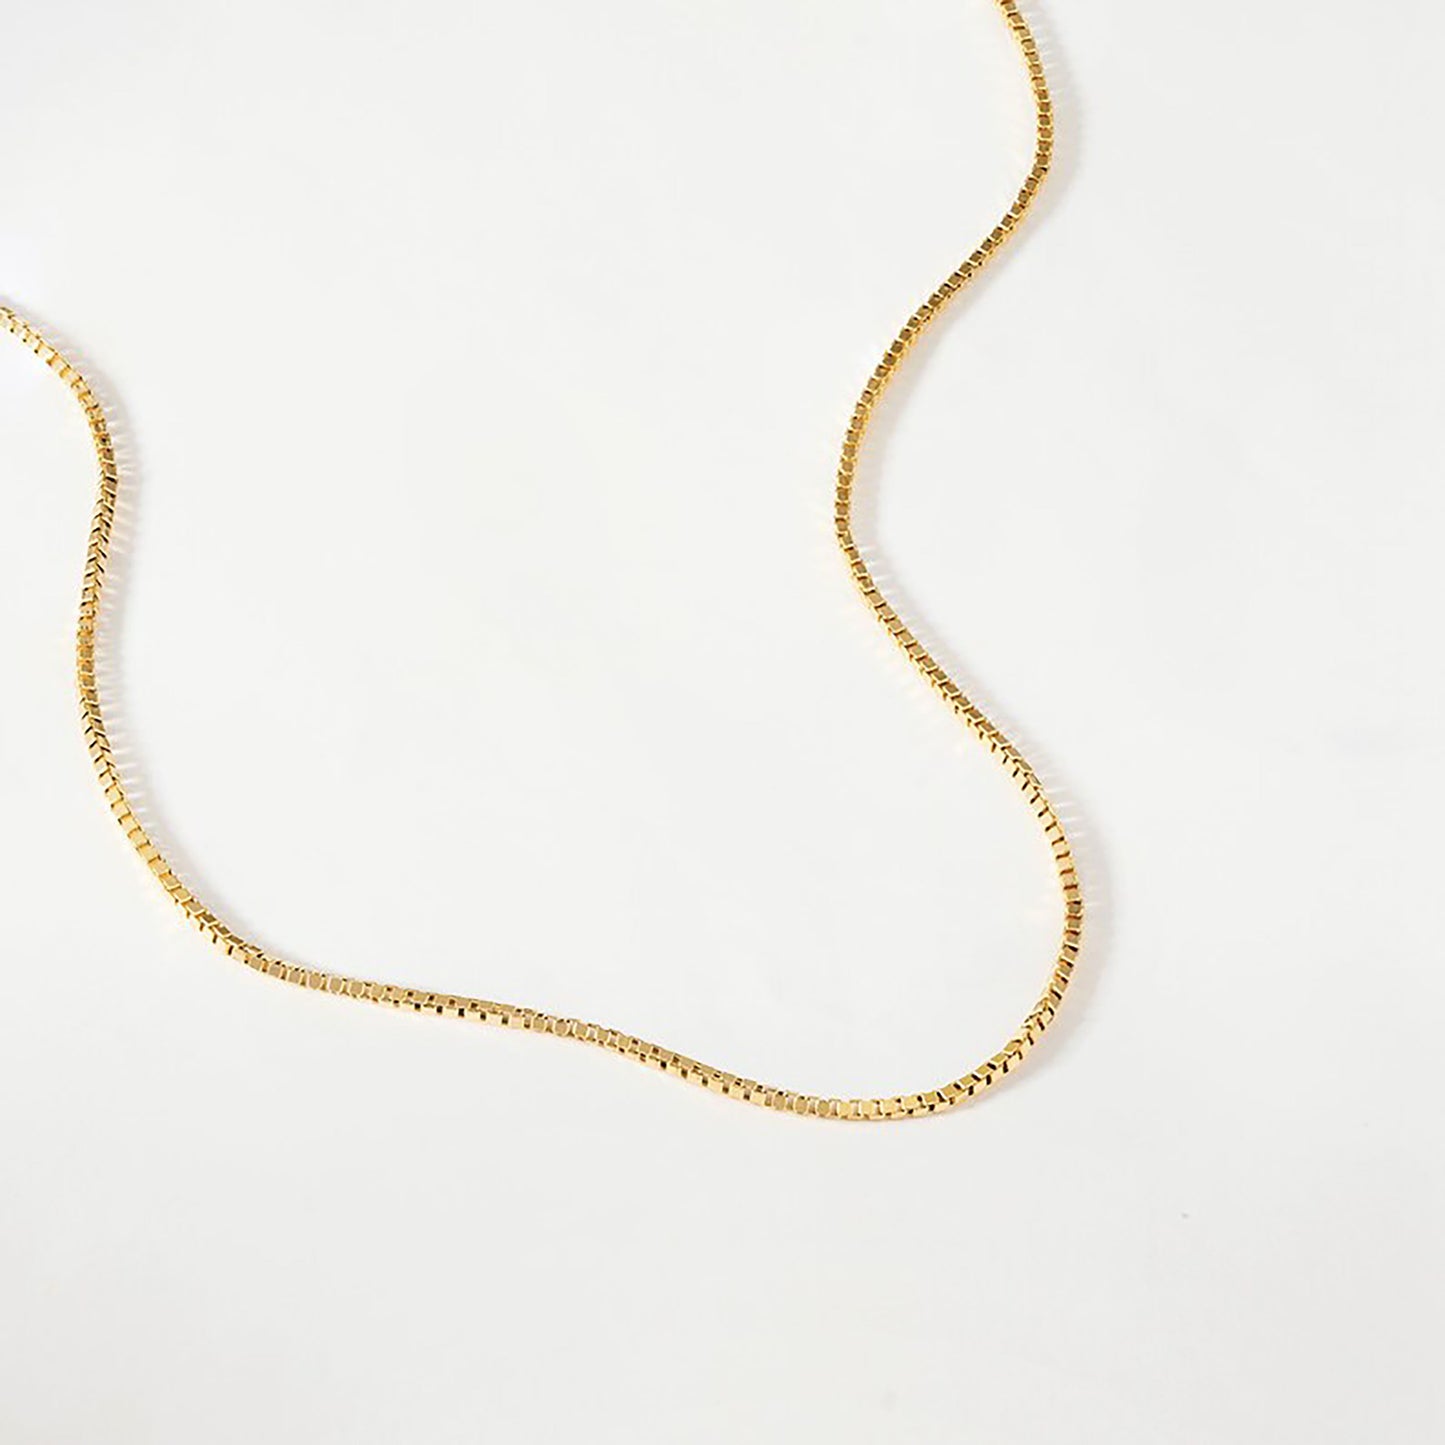 14K Solid Gold Box Link Chain Necklace | 16 to 22 Inch length